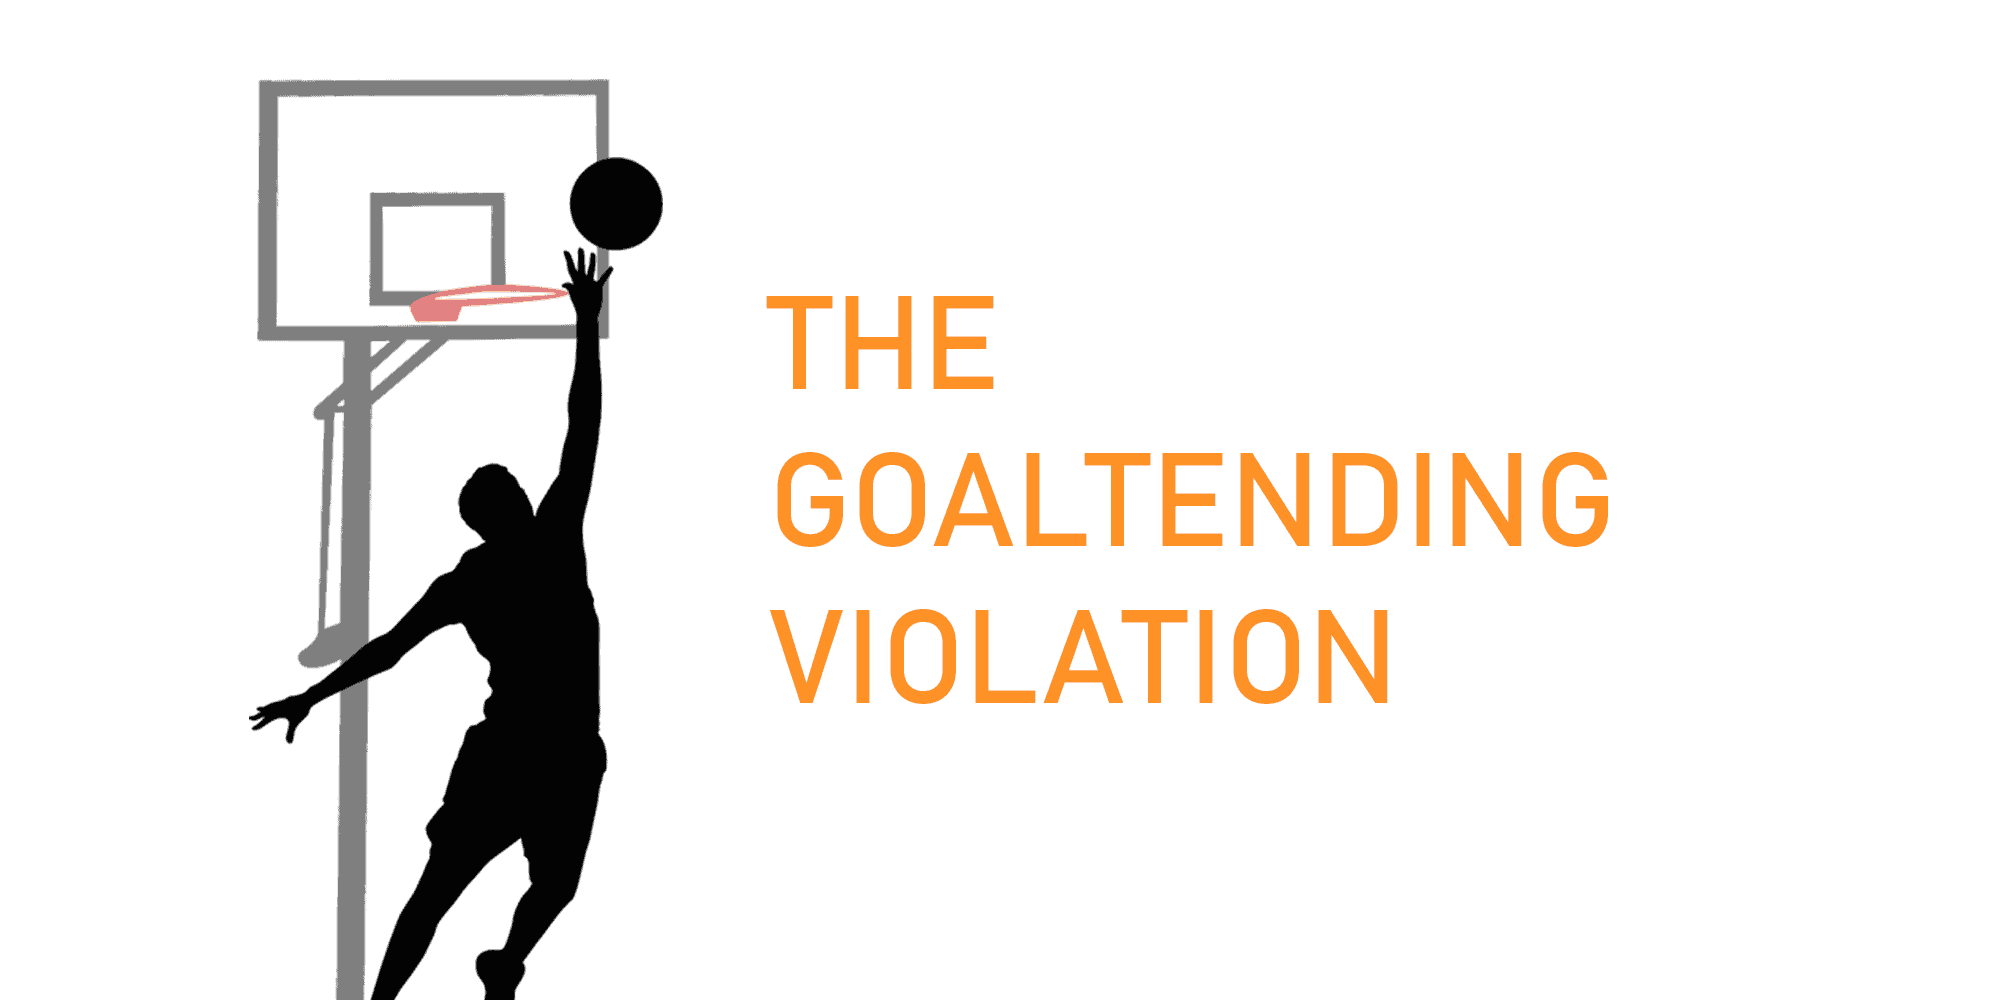 What Is Goaltending In Basketball? Explaining The Confusing Rule